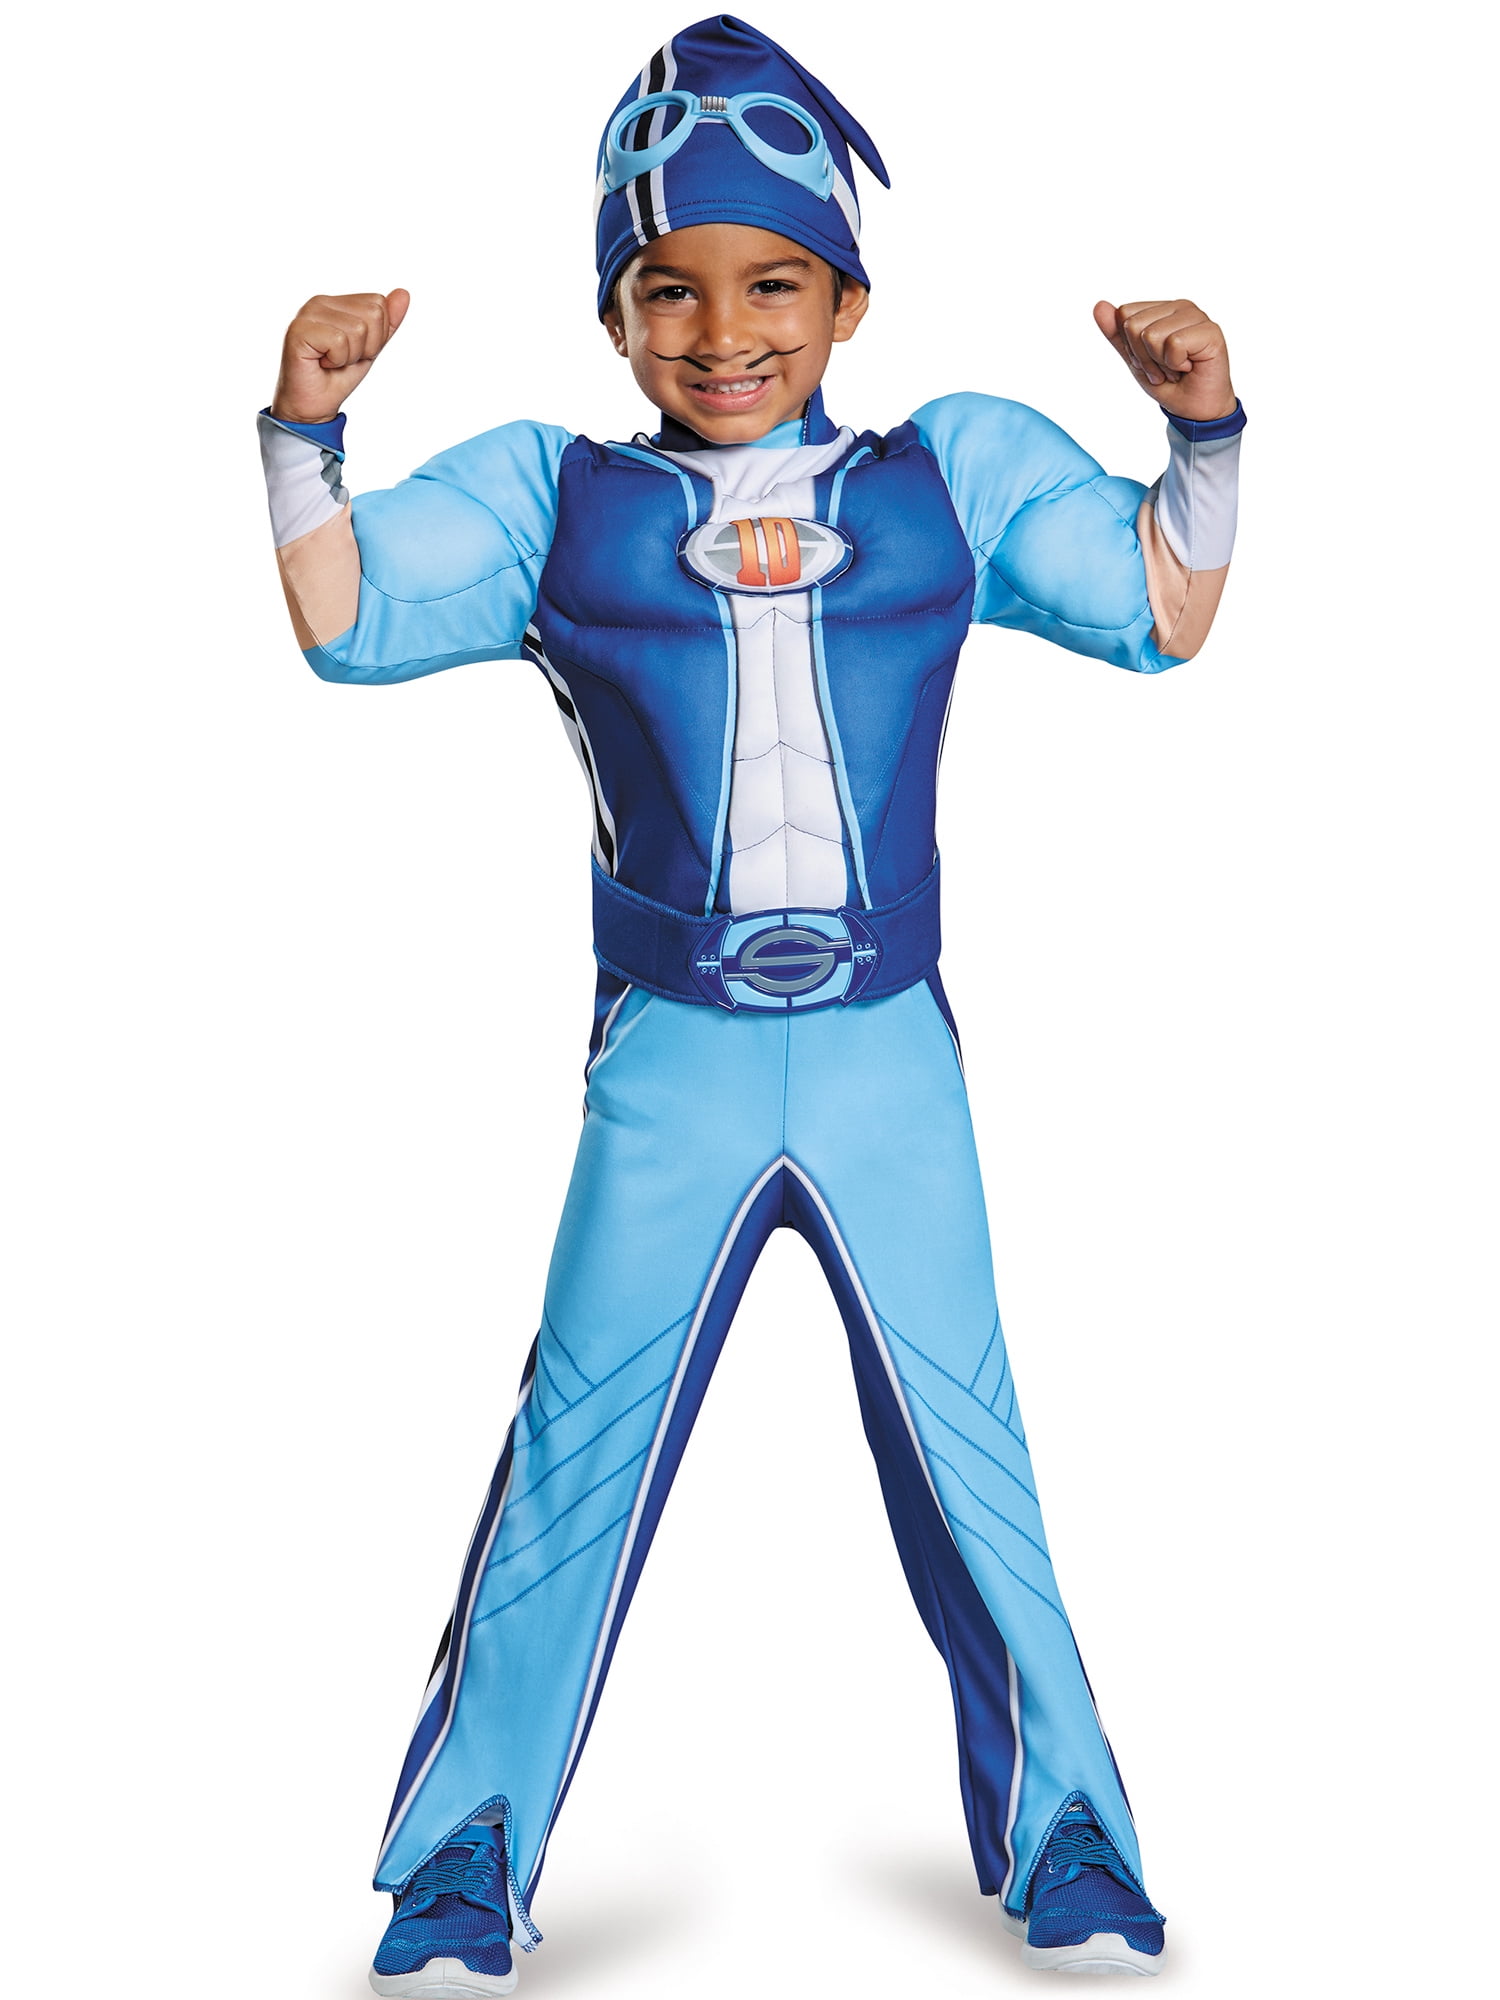 Lazytown Toddler Sportacus Muscle Chest - Walmart.com